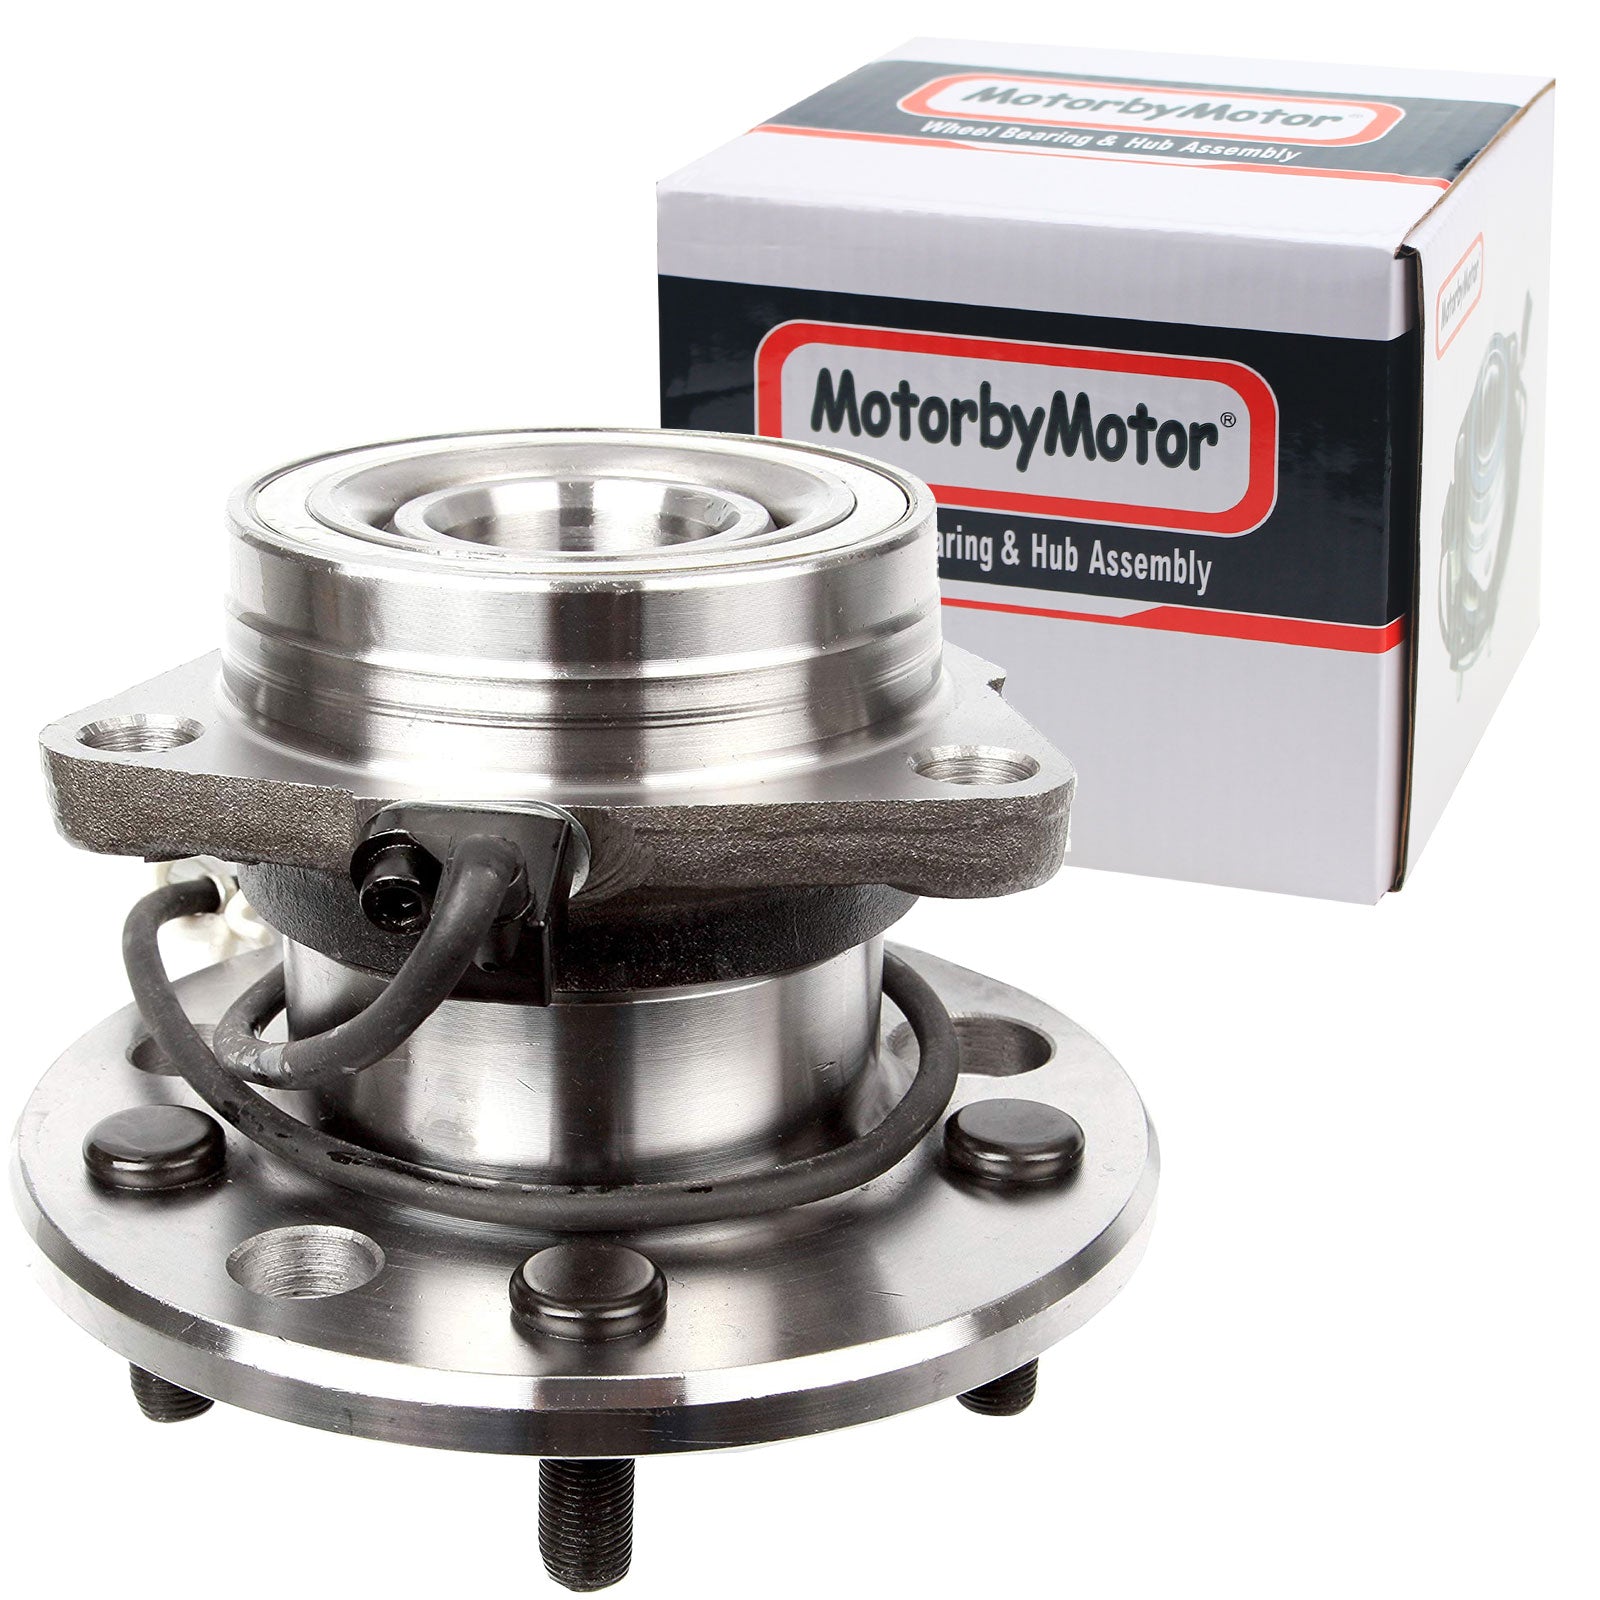 MotorbyMotor 515019 Front Wheel Bearing and Hub Assembly with 5 Lugs fits for Chevrolet Astro,GMC Safari Low-Runout OE Directly Replacement Hub Bearing AWD w/ABS MotorbyMotor